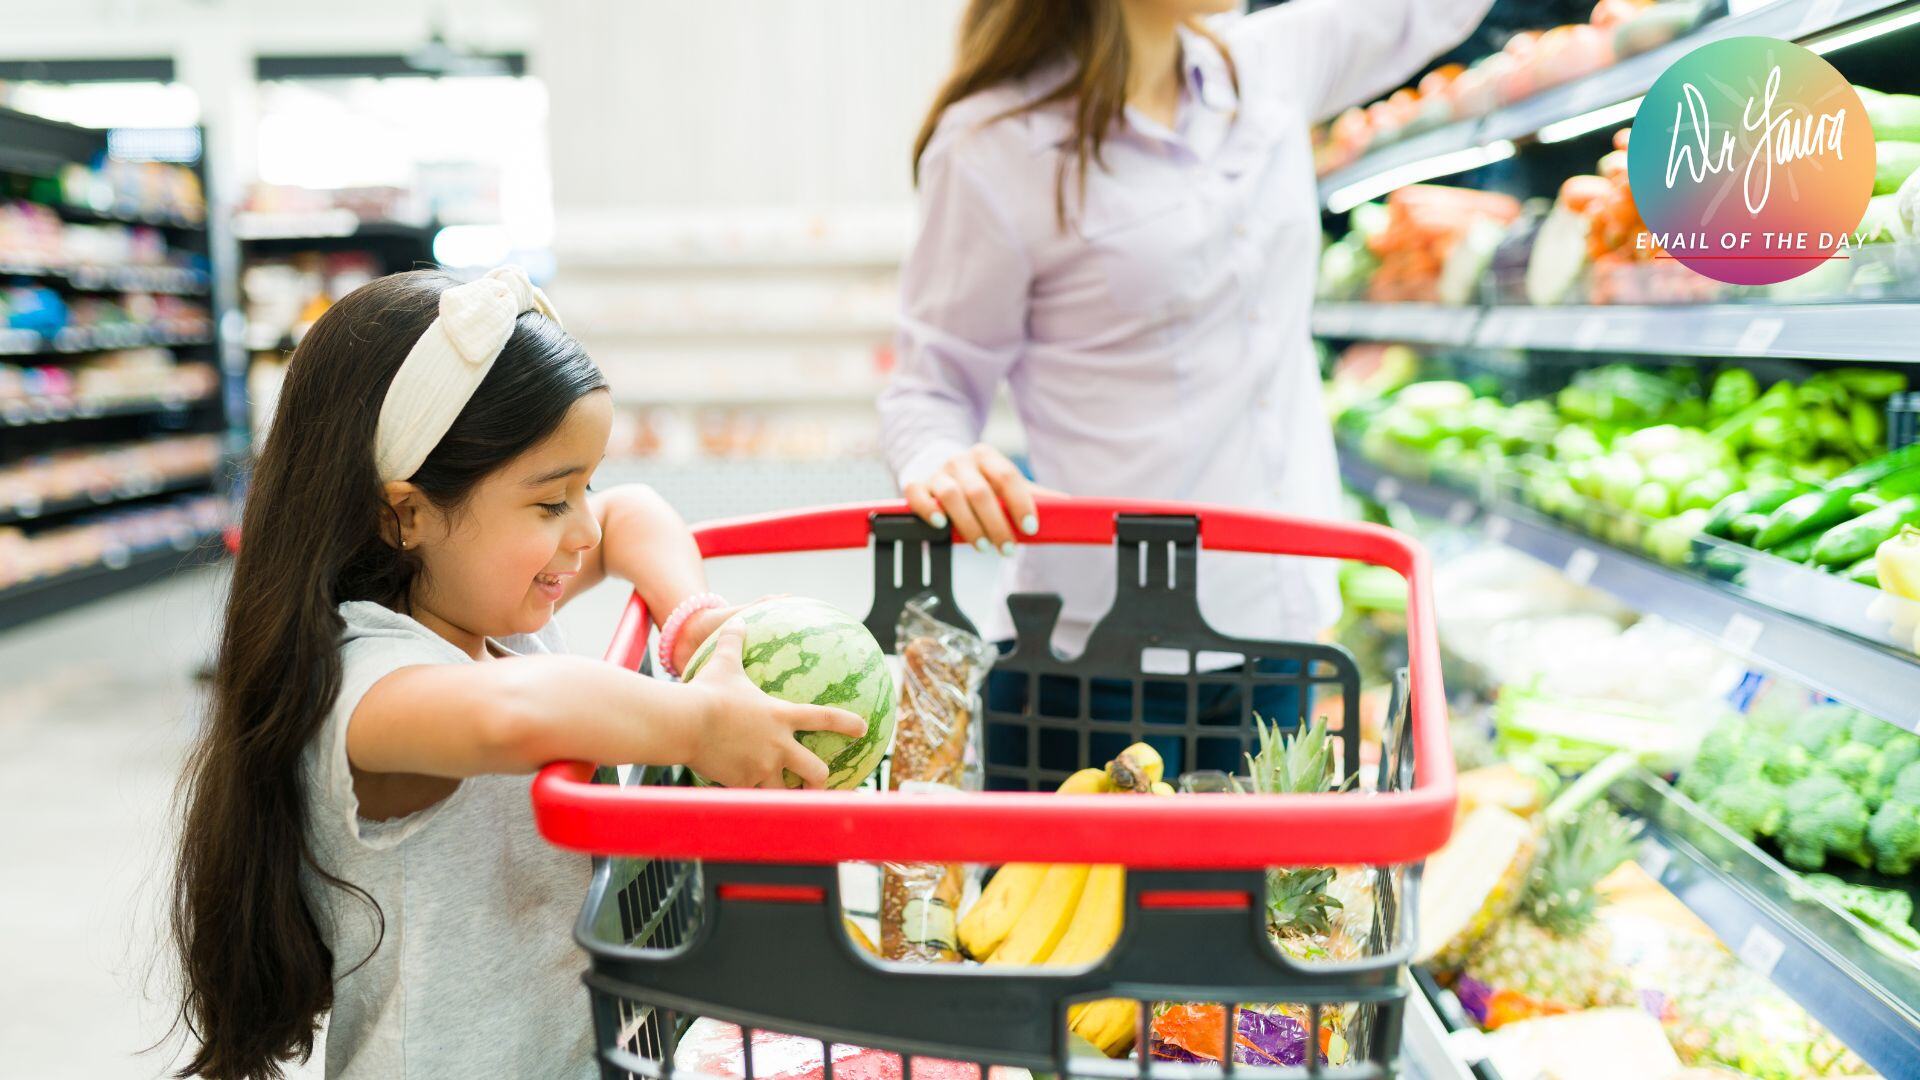 Little girl puts a watermelon in a shopping cart in a grocery store while woman stands behind it